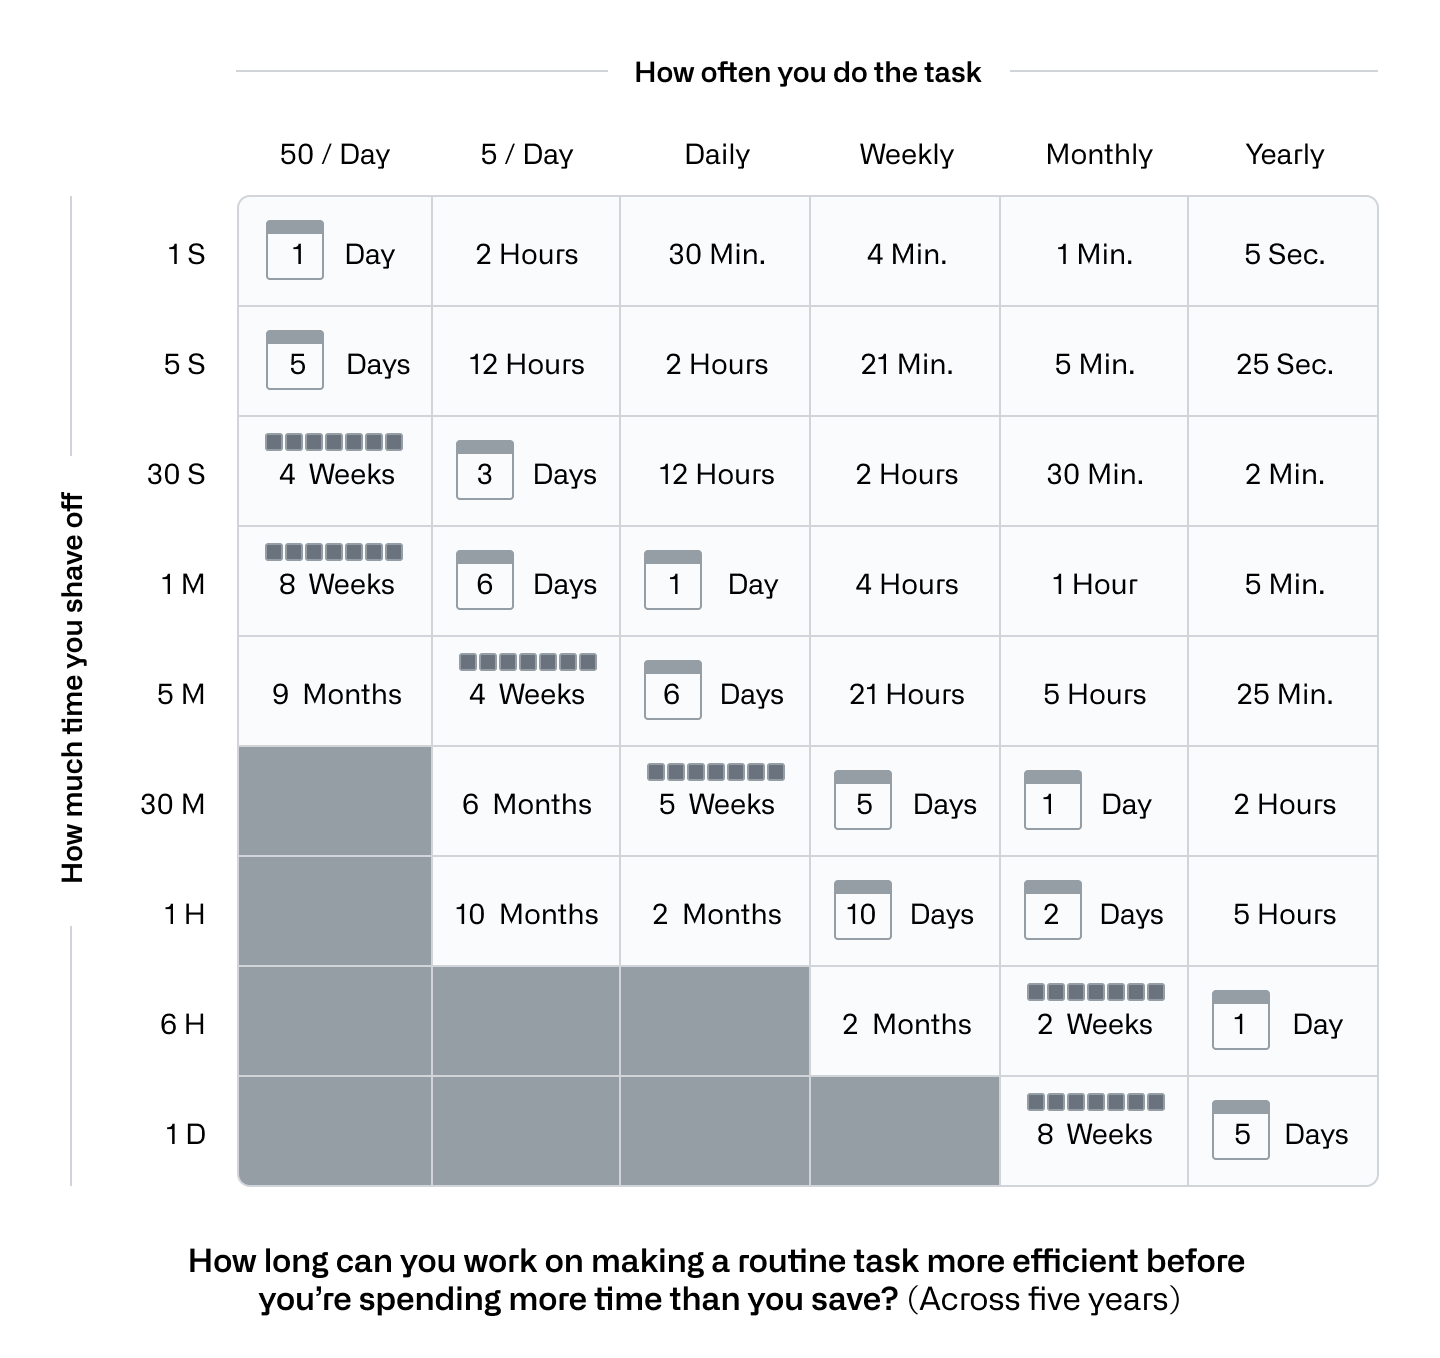 Table shows how long you can work on making a routine task more efficient before you’re spending more time than you save across five years. For example: If you do a task 50 times a day, and it takes 1 second, it’s worth spending 1 day automating it.